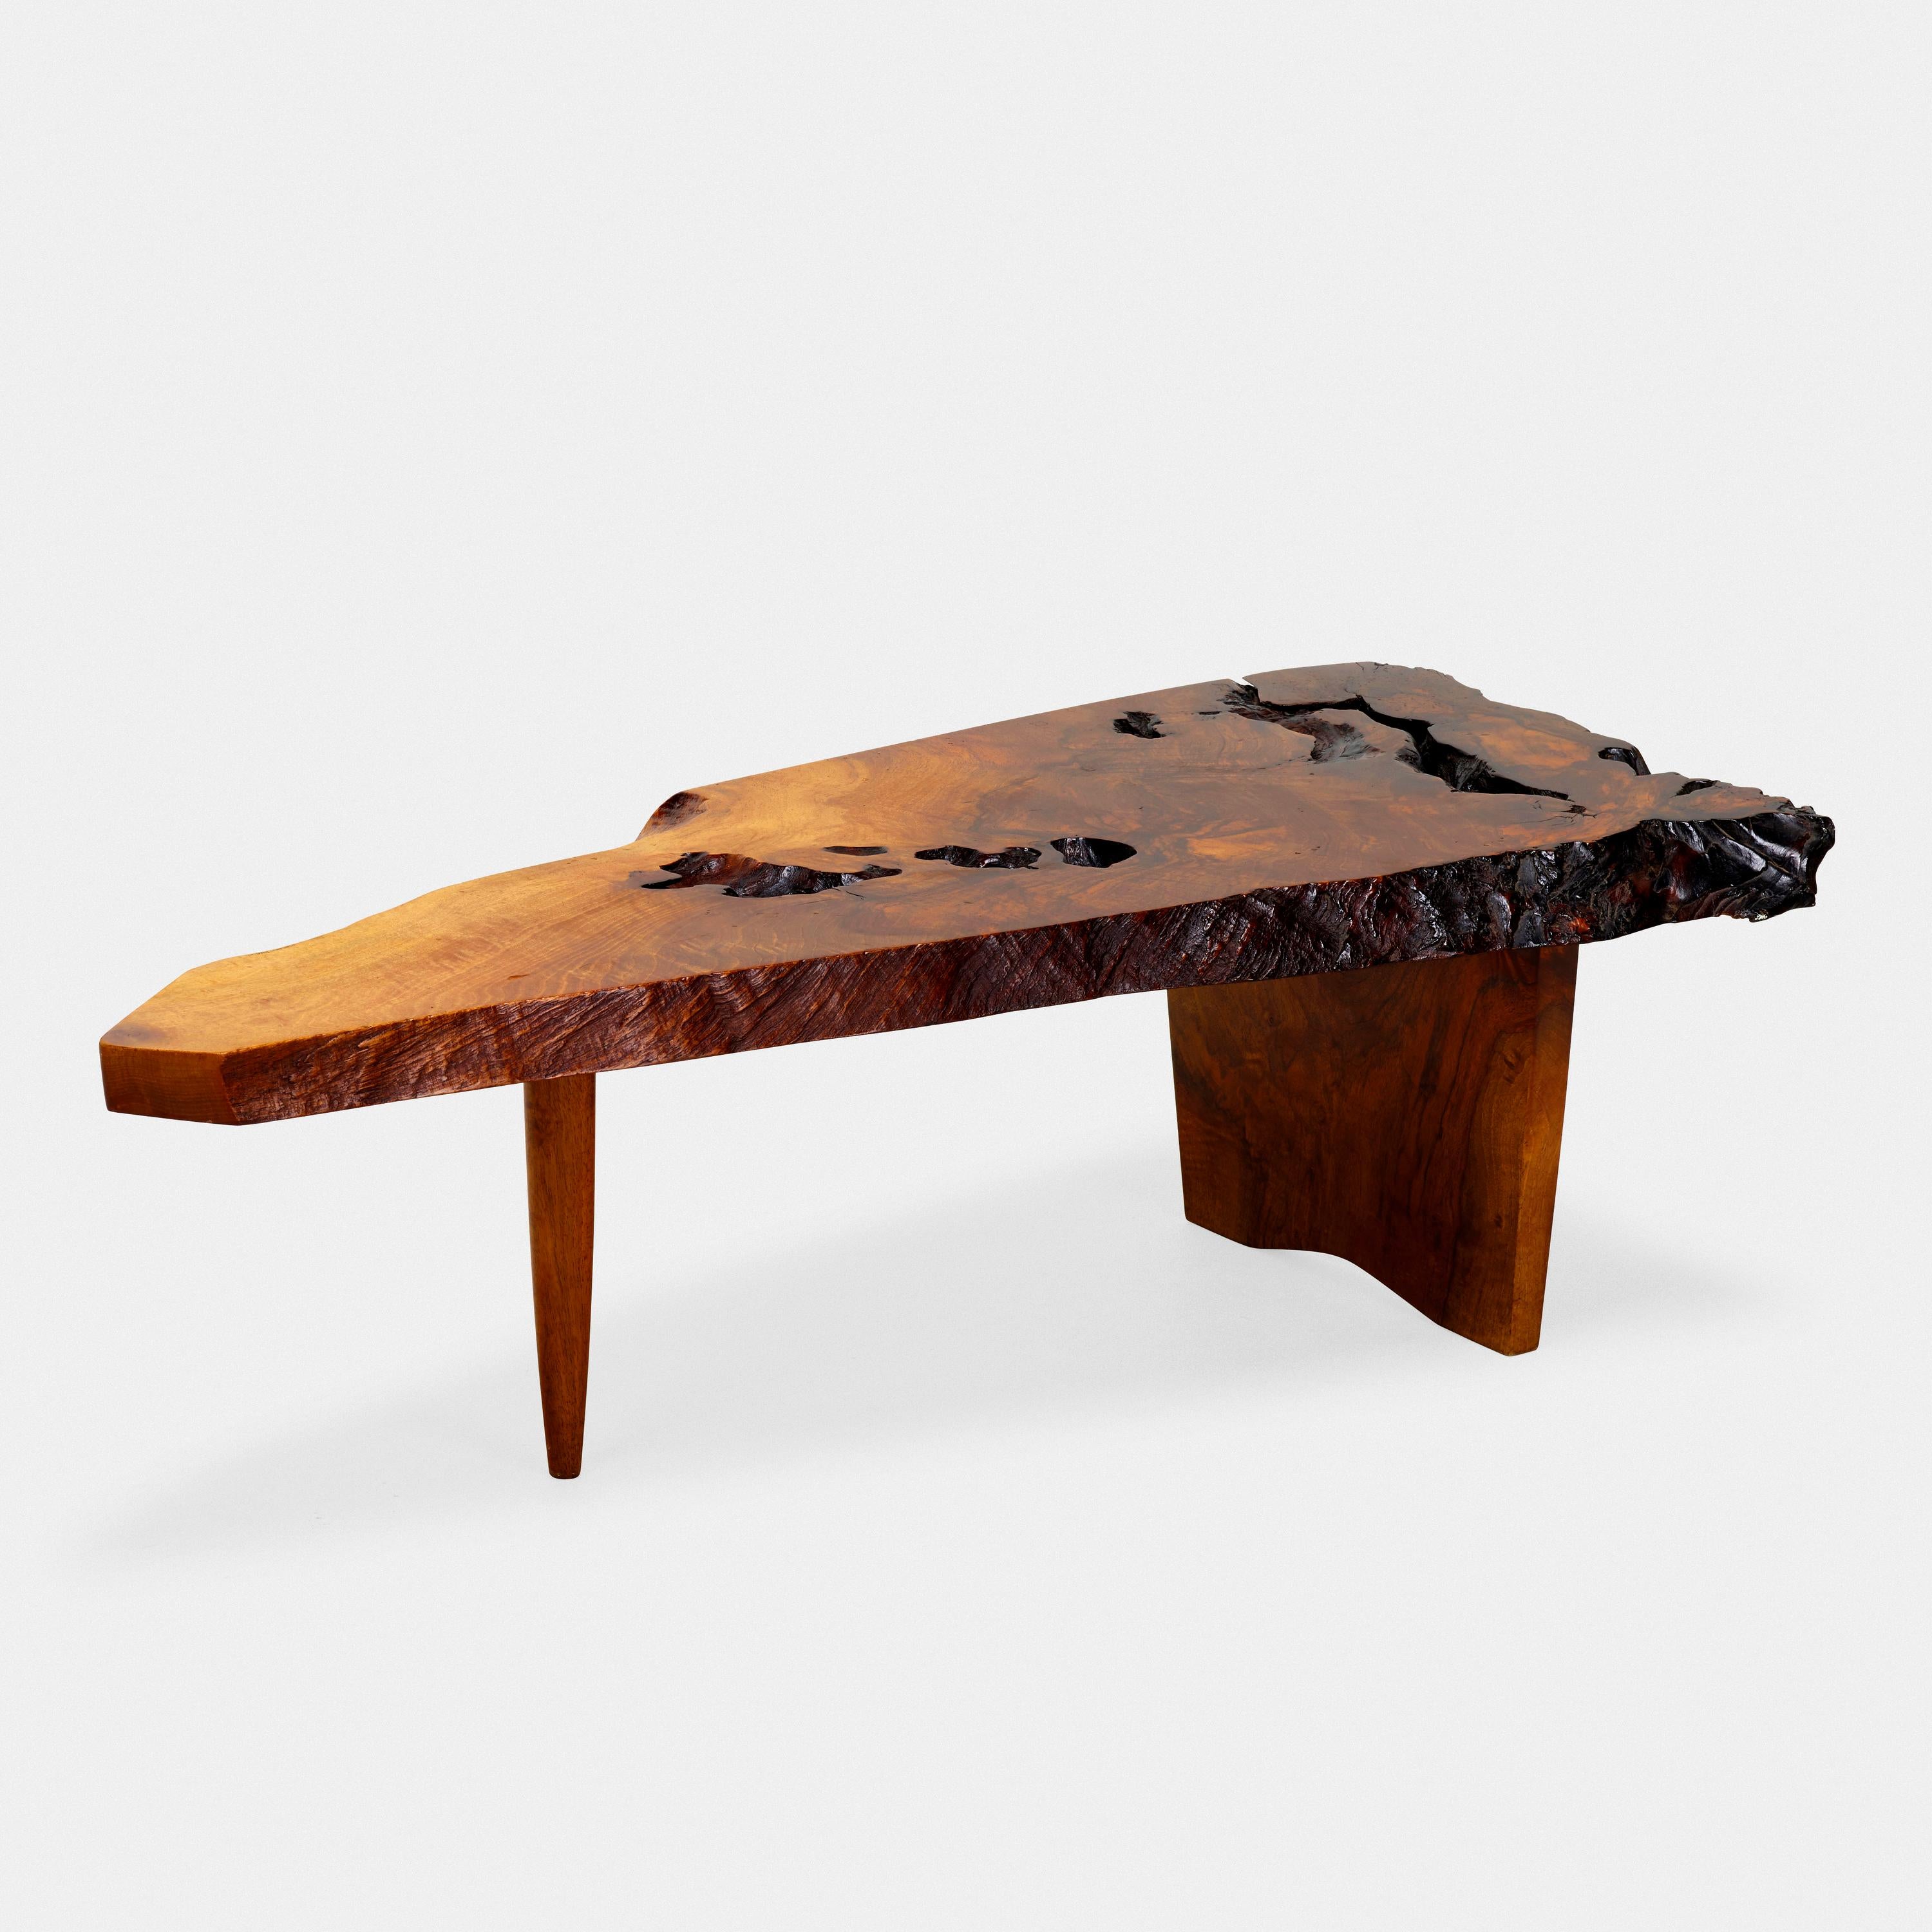 An exquisite George Nakashima Conoid cocktail table executed in English walnut, its subtriangular, slab top with three live edges, and featuring expressive grain / details, naturally occurring separations, and open knots. Underside bears client's